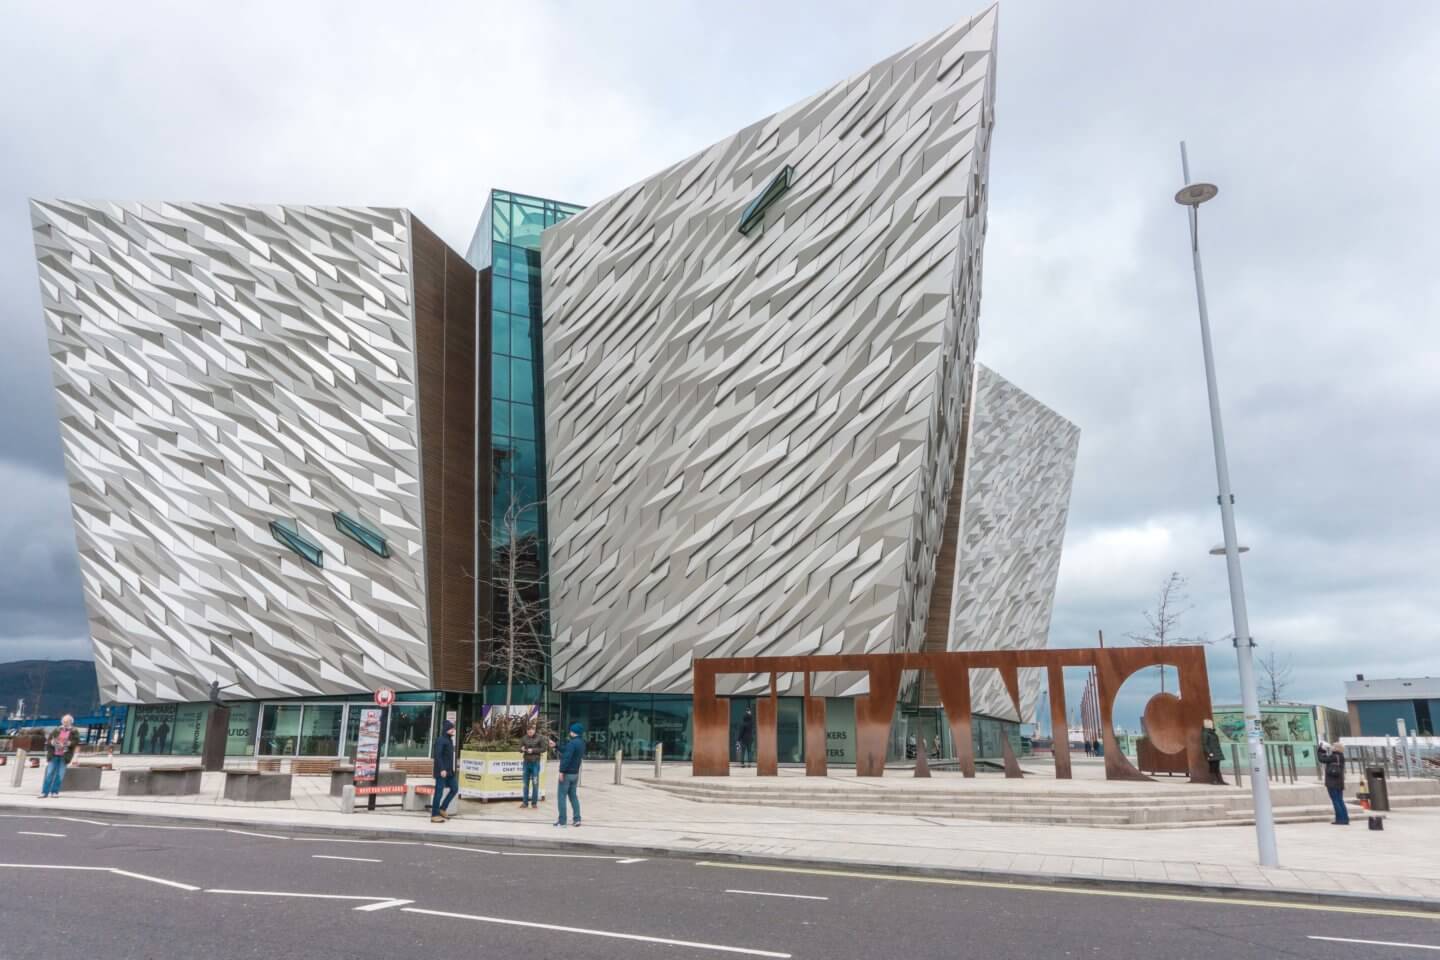 Outside the Titanic museum in Belfast, Northern Ireland - Places to visit in Ireland 